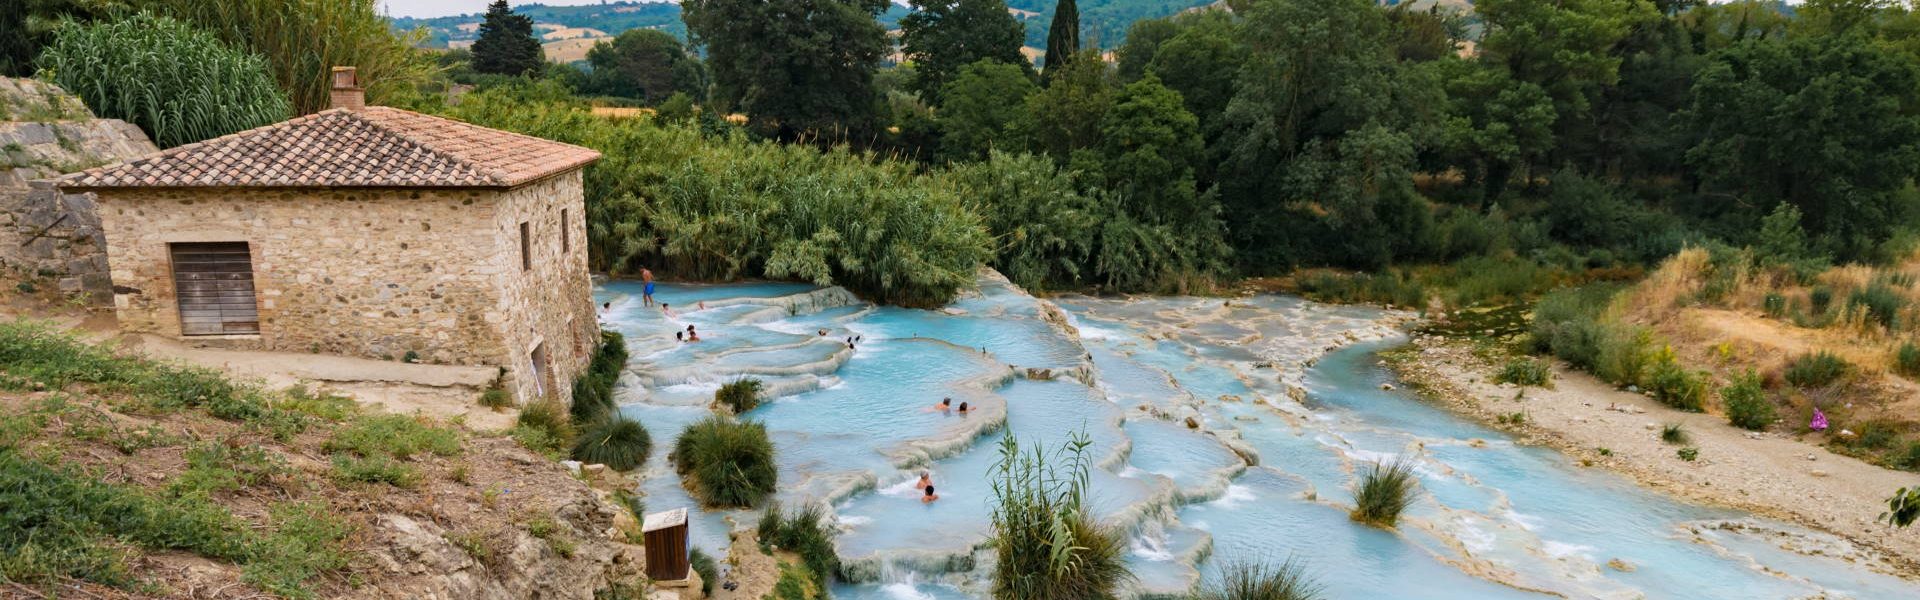 Natural spa with waterfalls in Saturnia, Tuscany, Italy.